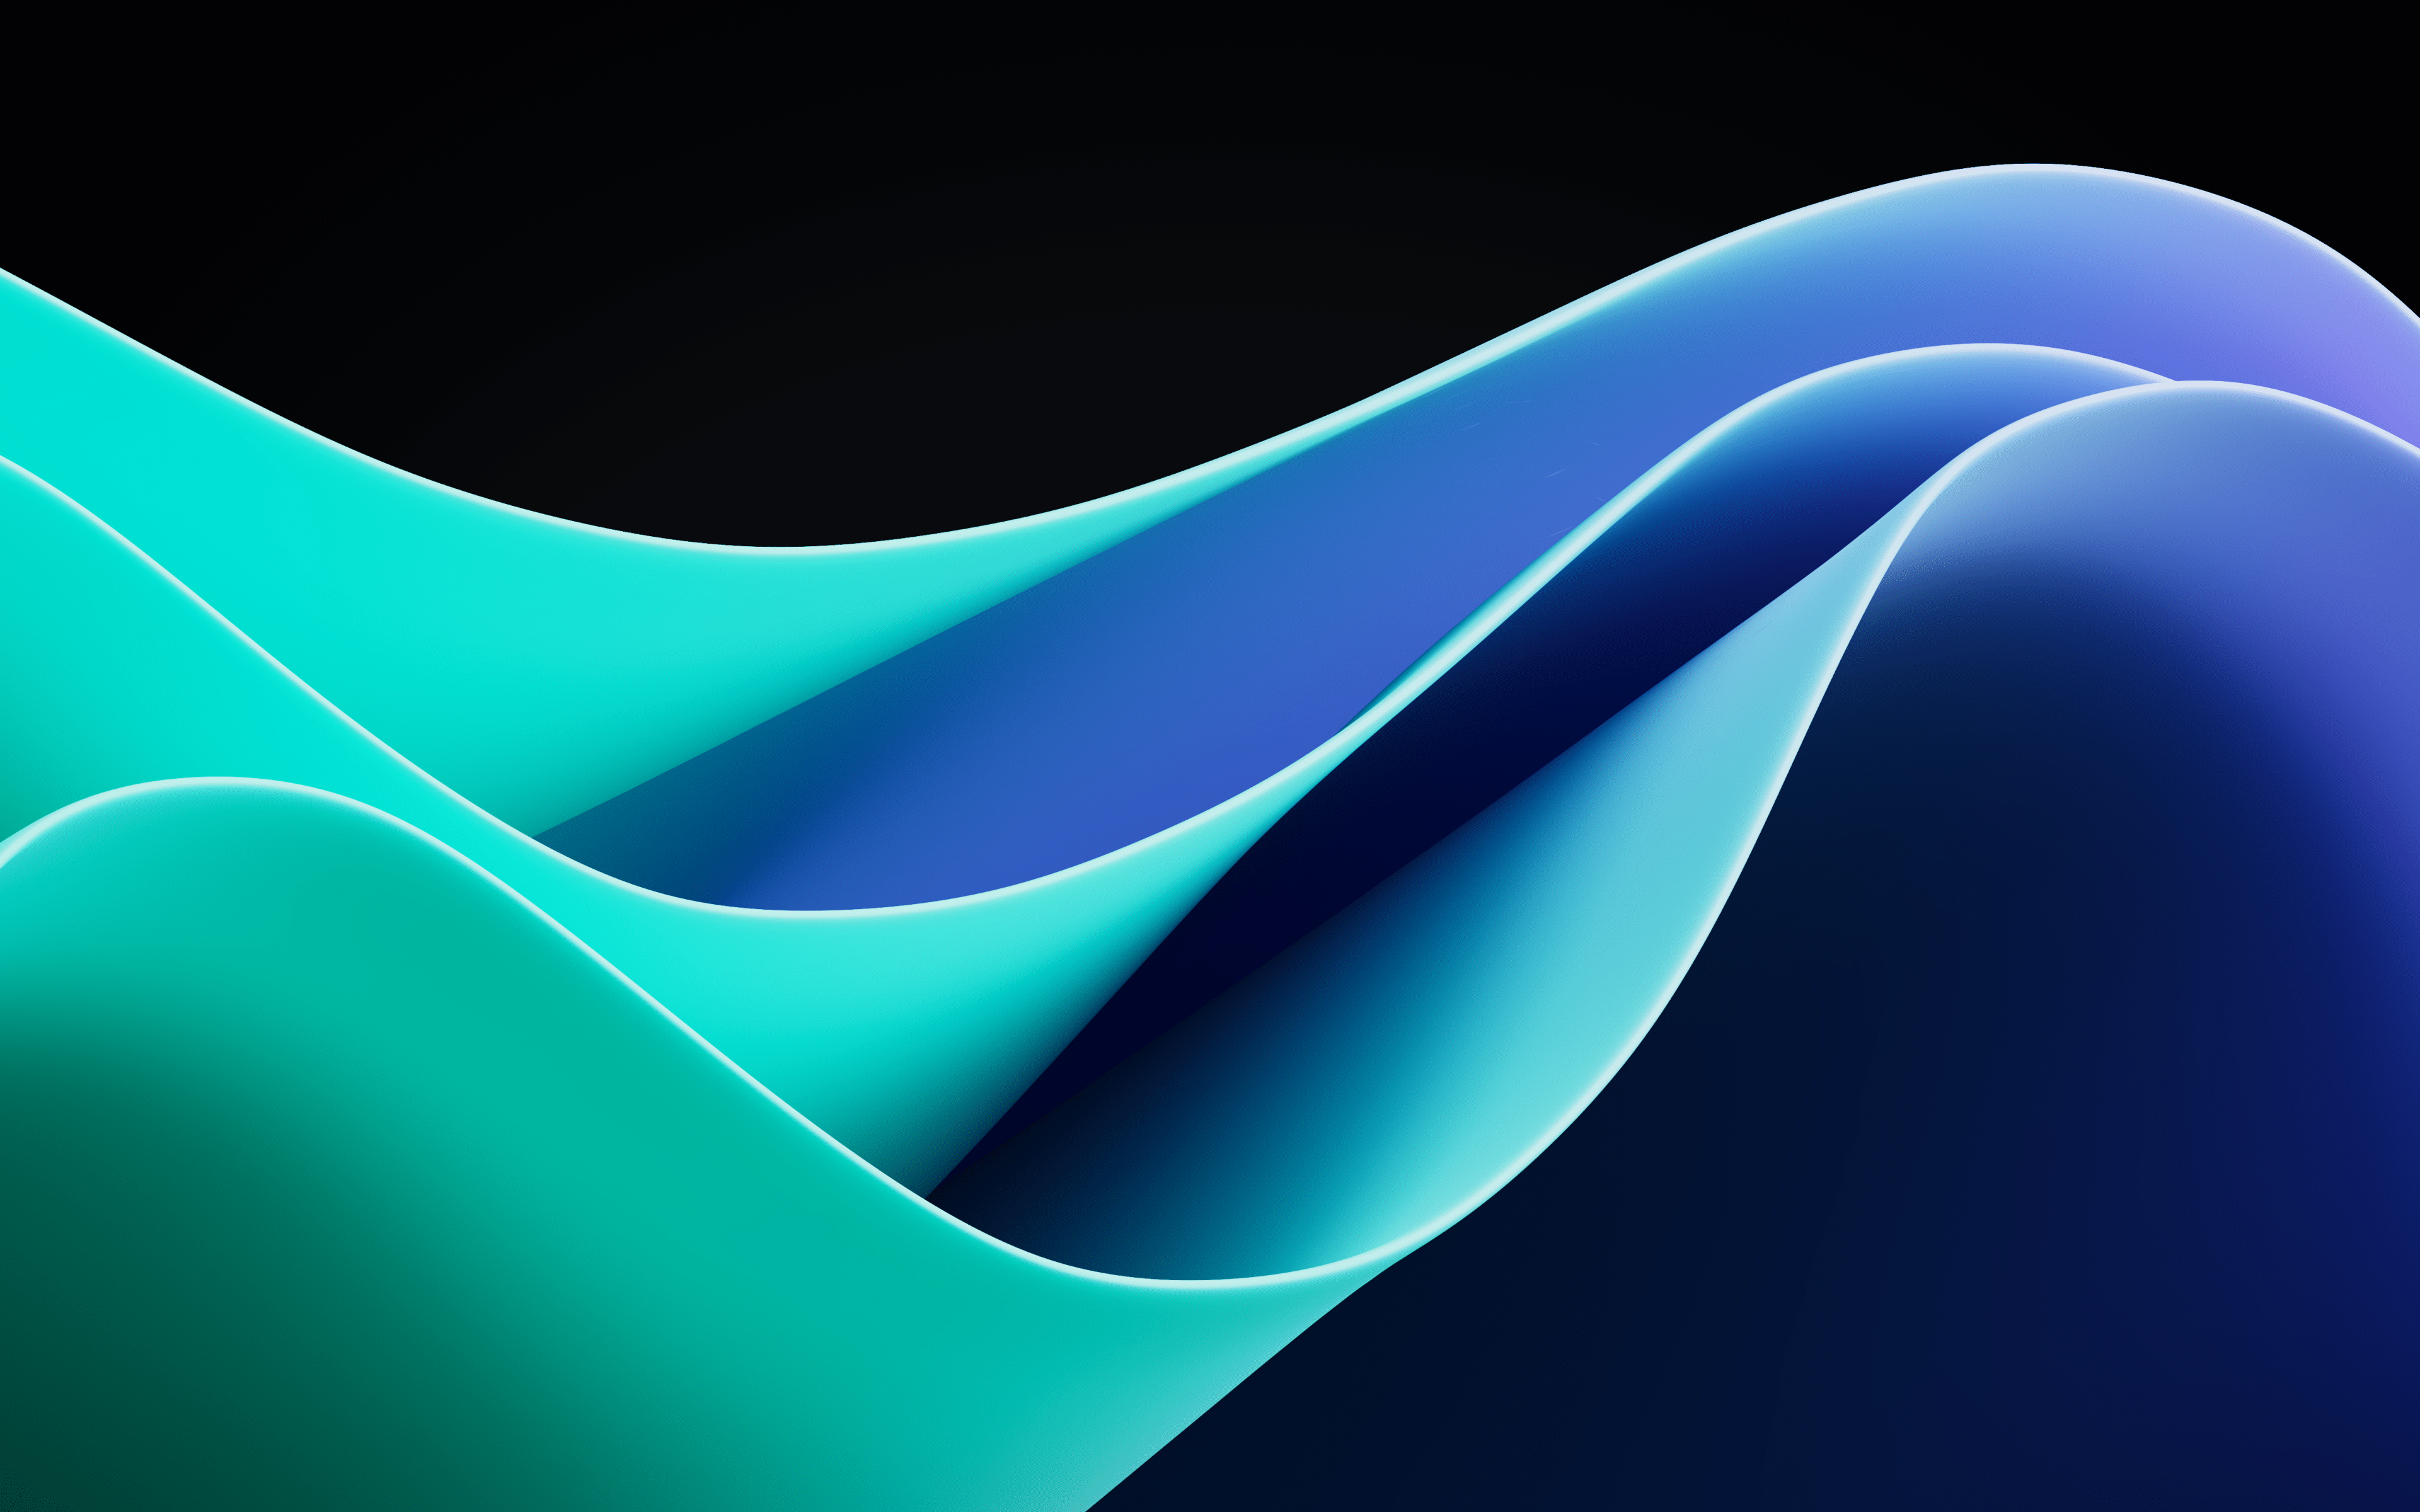 A blue and green wave abstract art piece with a black background. - Windows 11